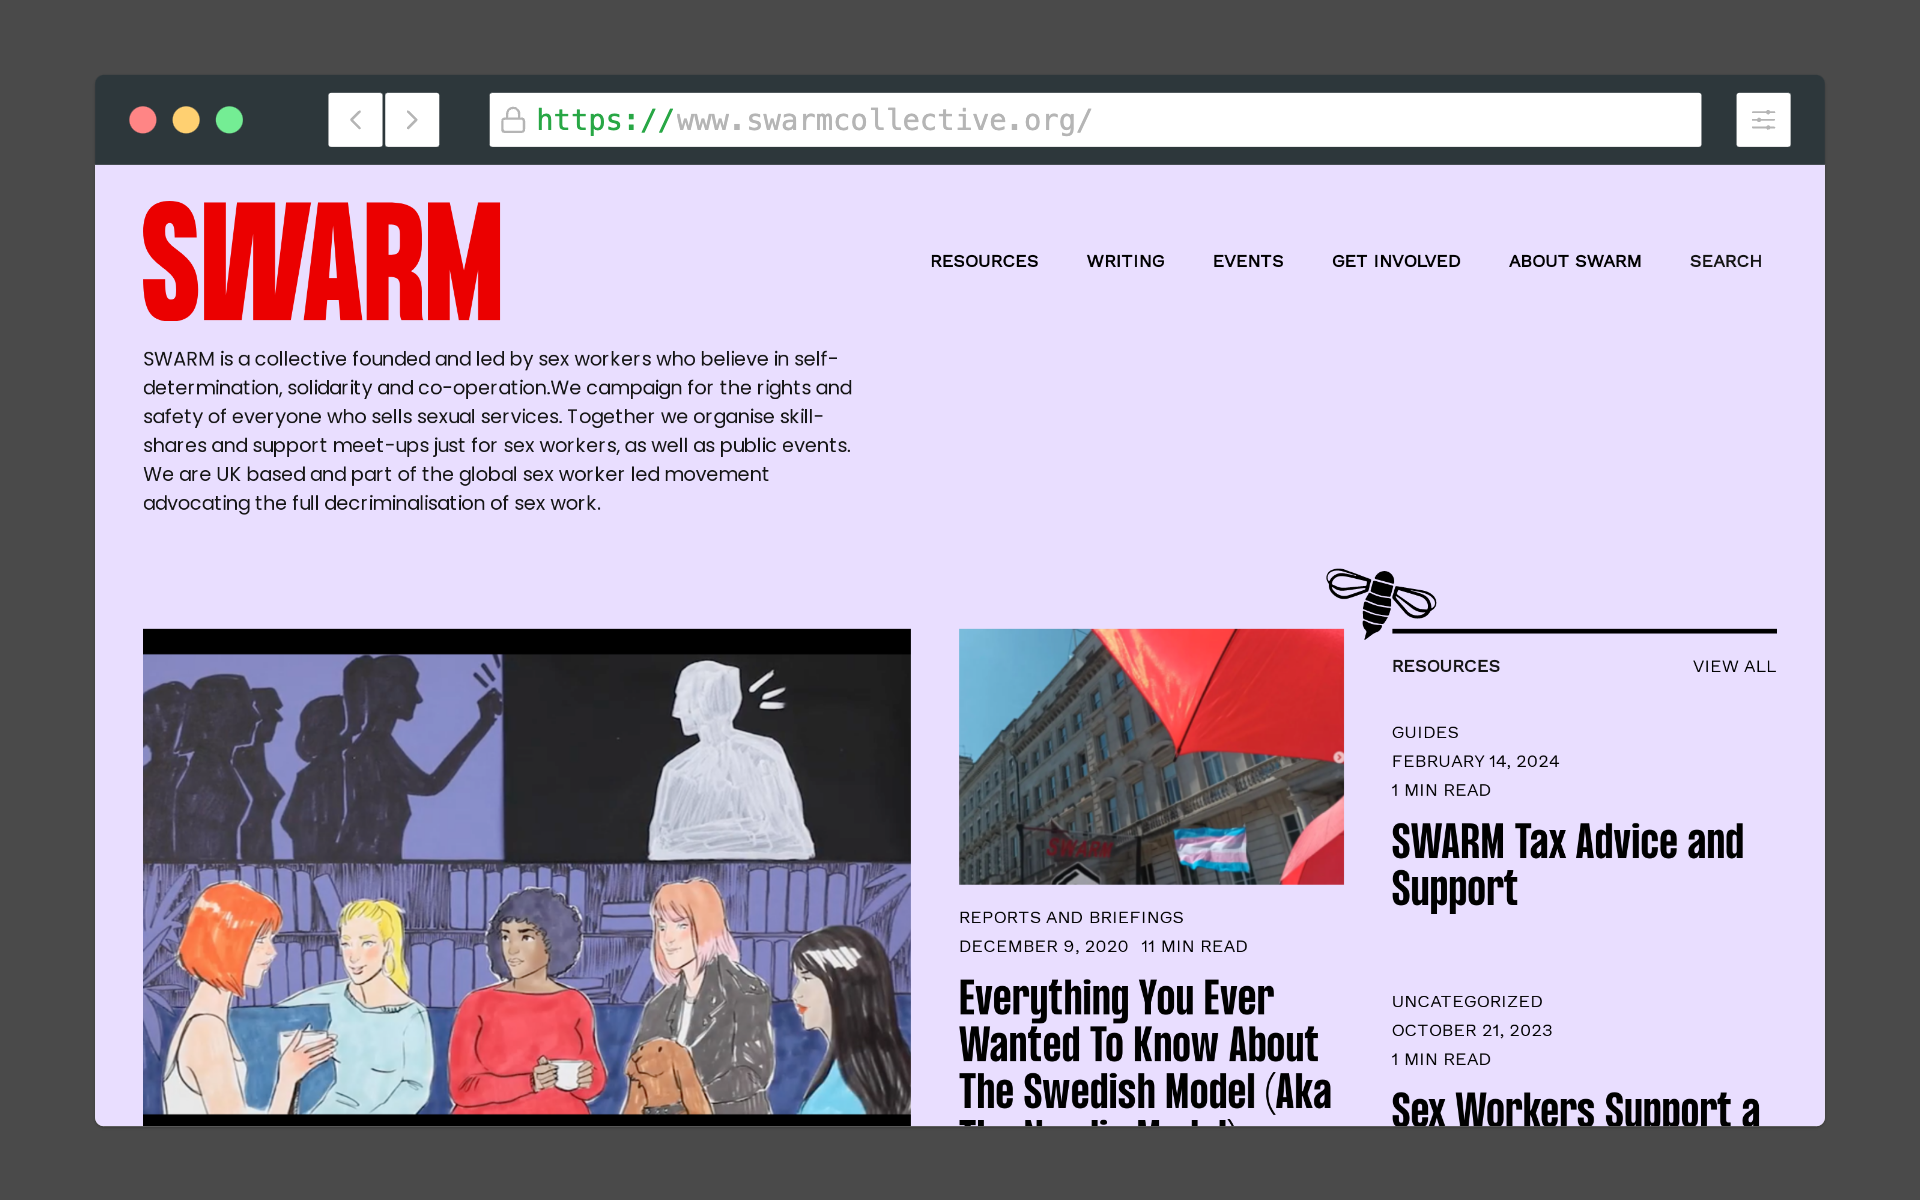 An image of the home page of the website for the advoacy group SWARM.